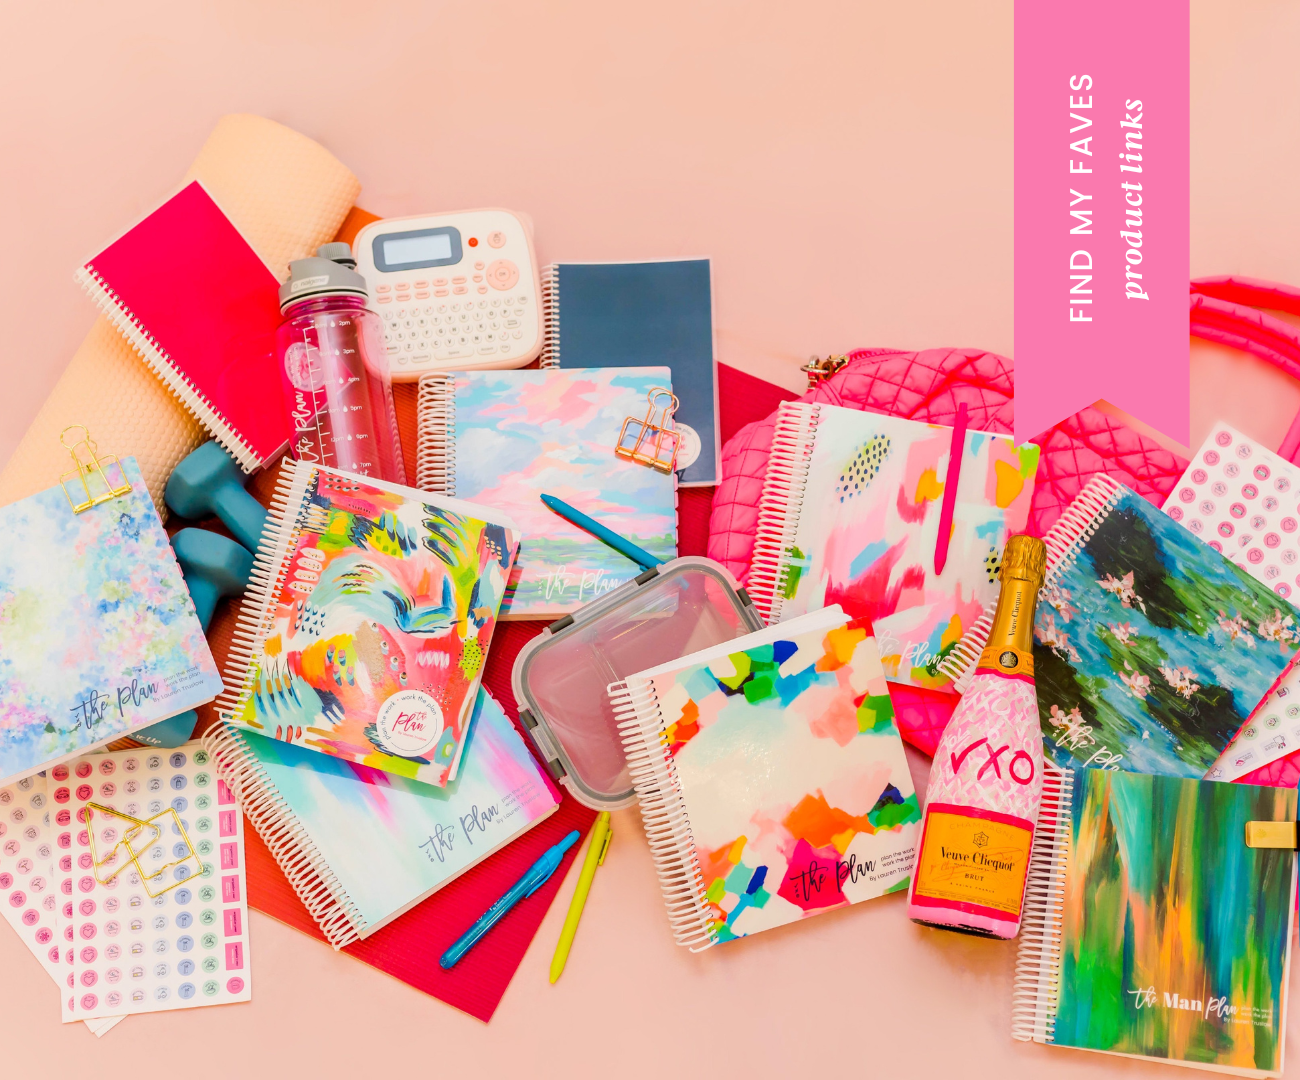 The Plan 2023, The Party Plan, The Man Plan & Organizational, Lifestyle, and Stationary Products on a pink background